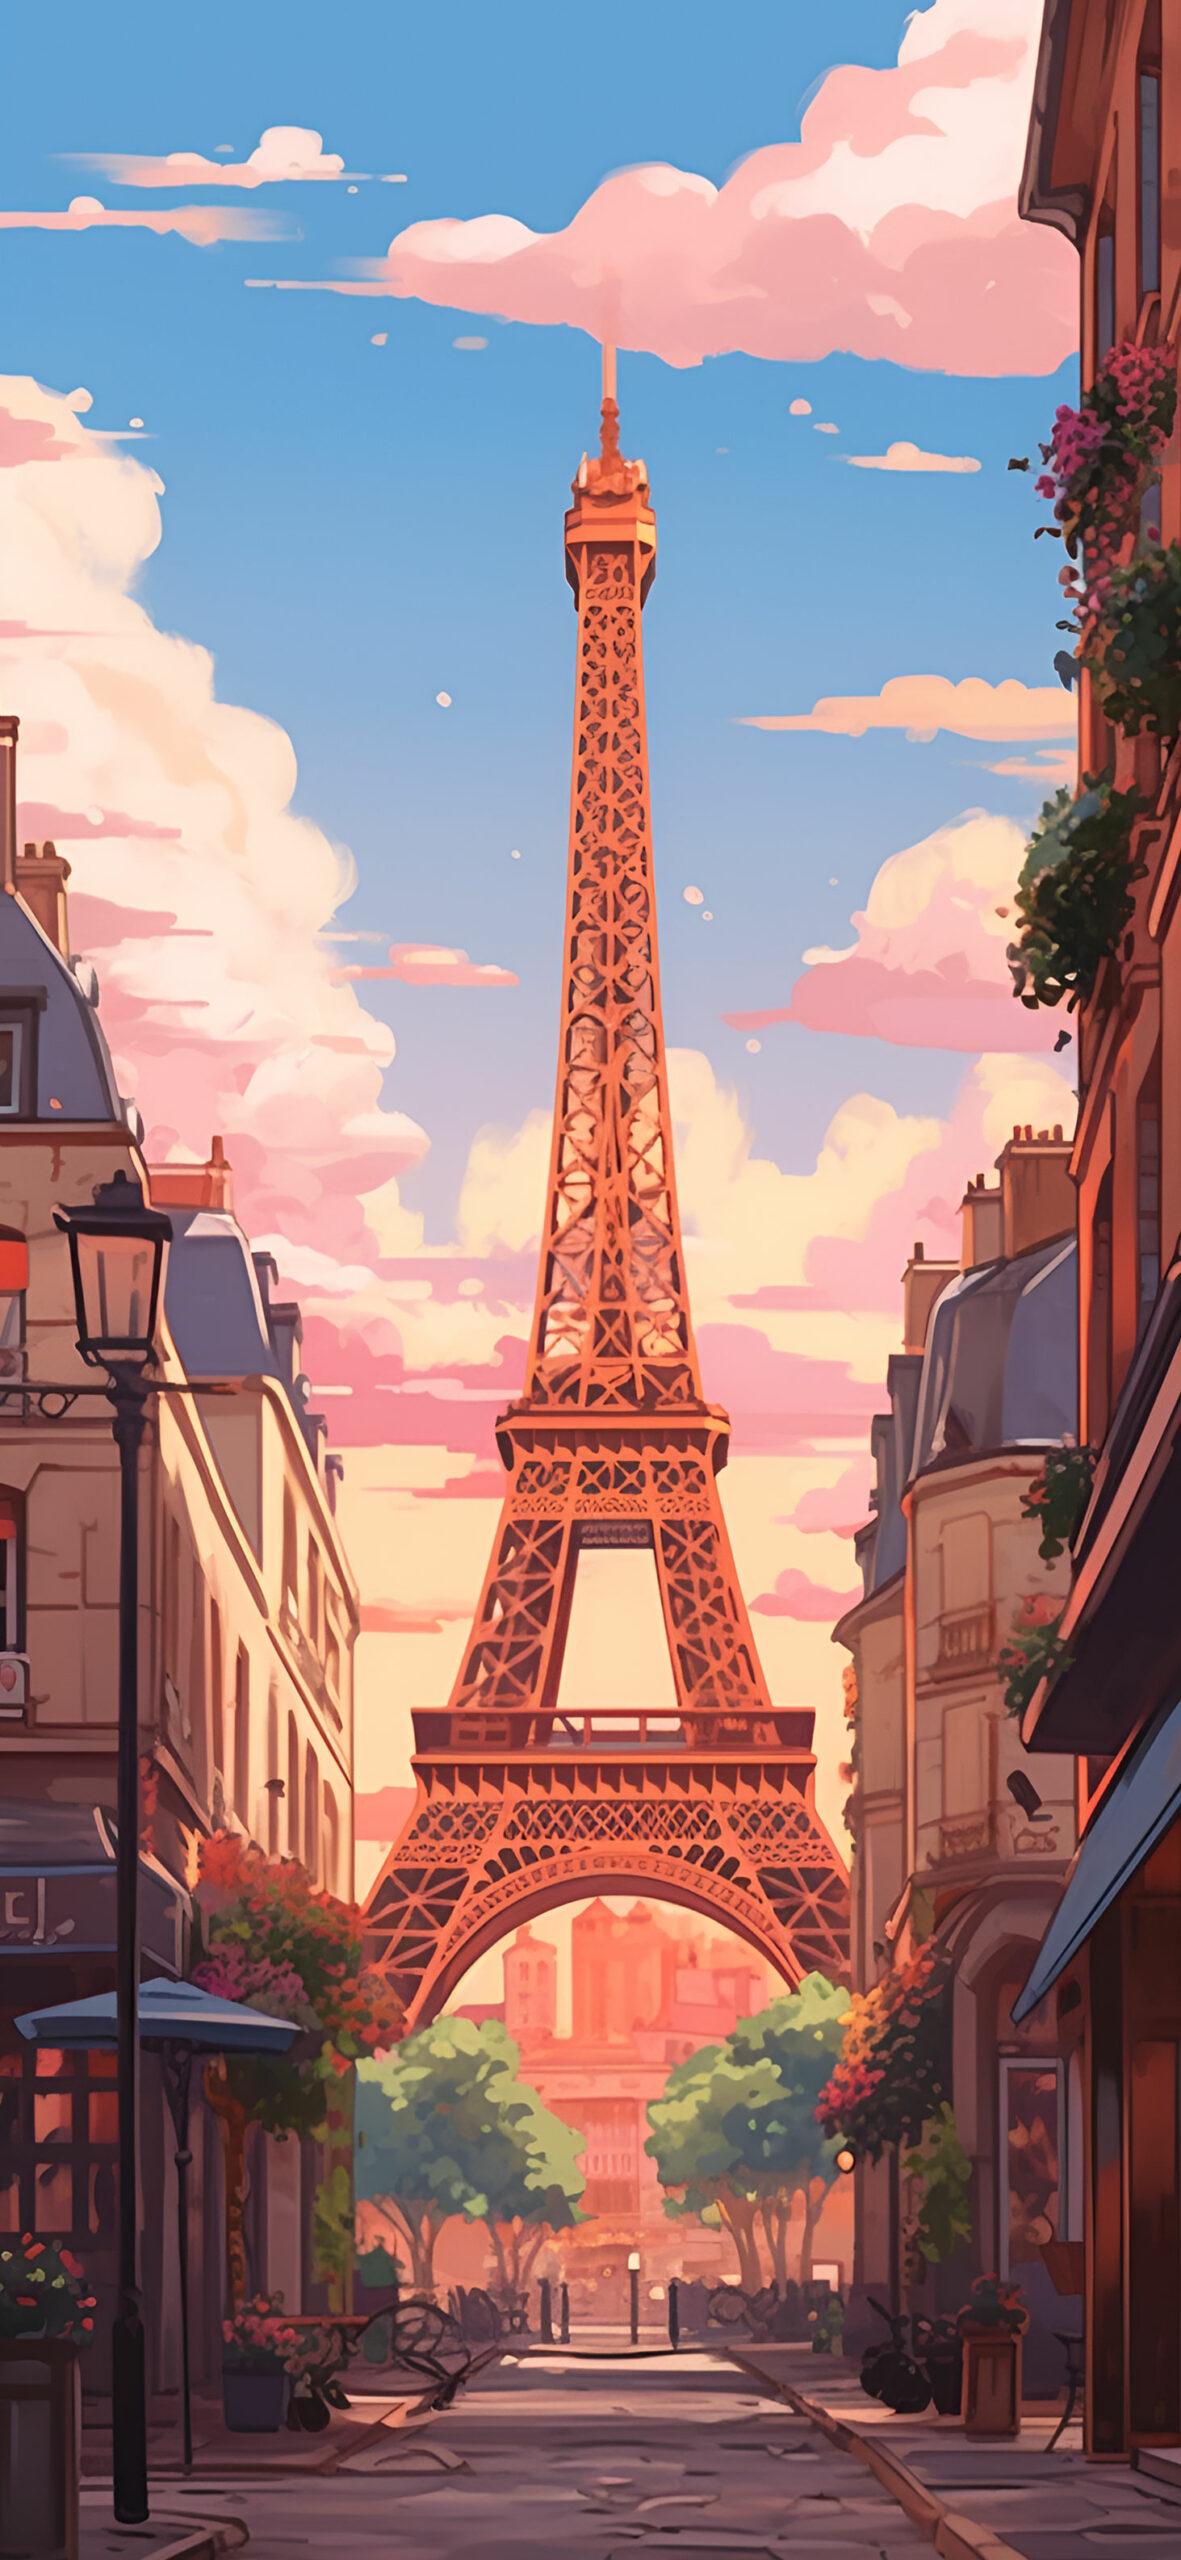 Paris Wallpaper - Stunning Designs for Your Home | Happywall-hancorp34.com.vn